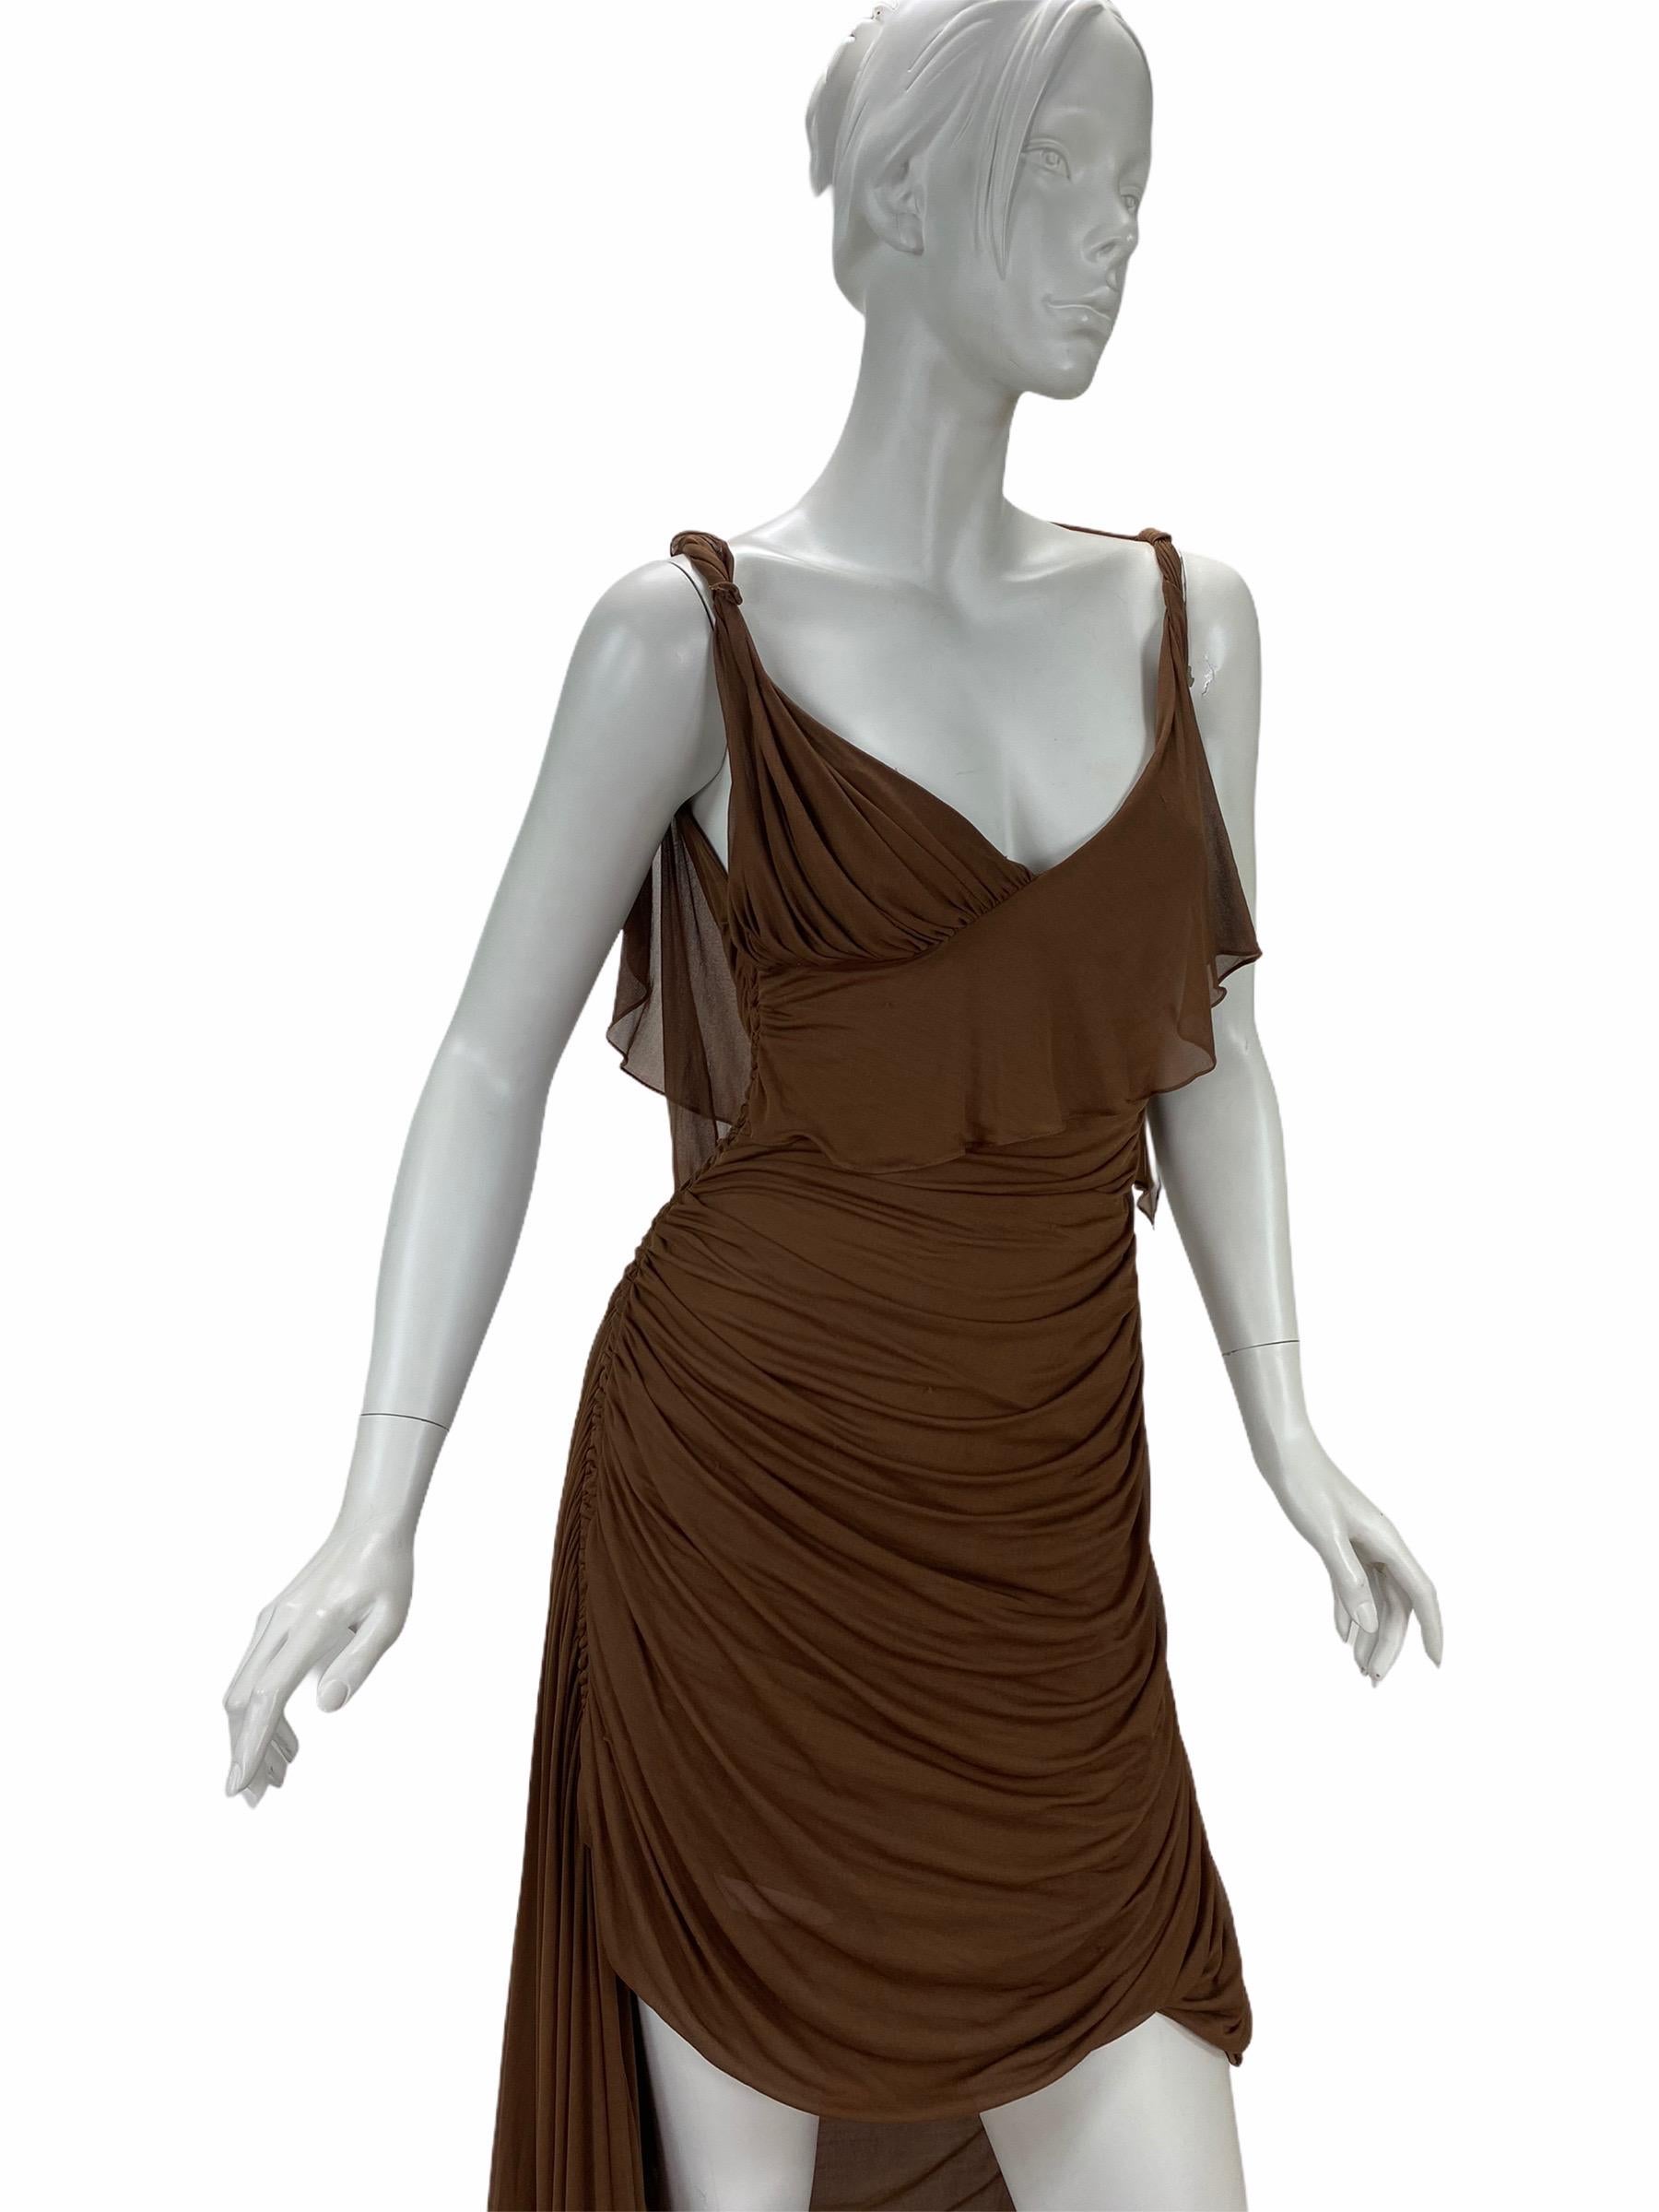 Imbued with feminine charm is a dress crafted
from Tom Ford’s imagination. Exclusively from the
2003 fall Gucci collection, it has been exhibited in
the Metropolitan Museum of Art for its flawless
craftsmanship. Composed of delicate silk in